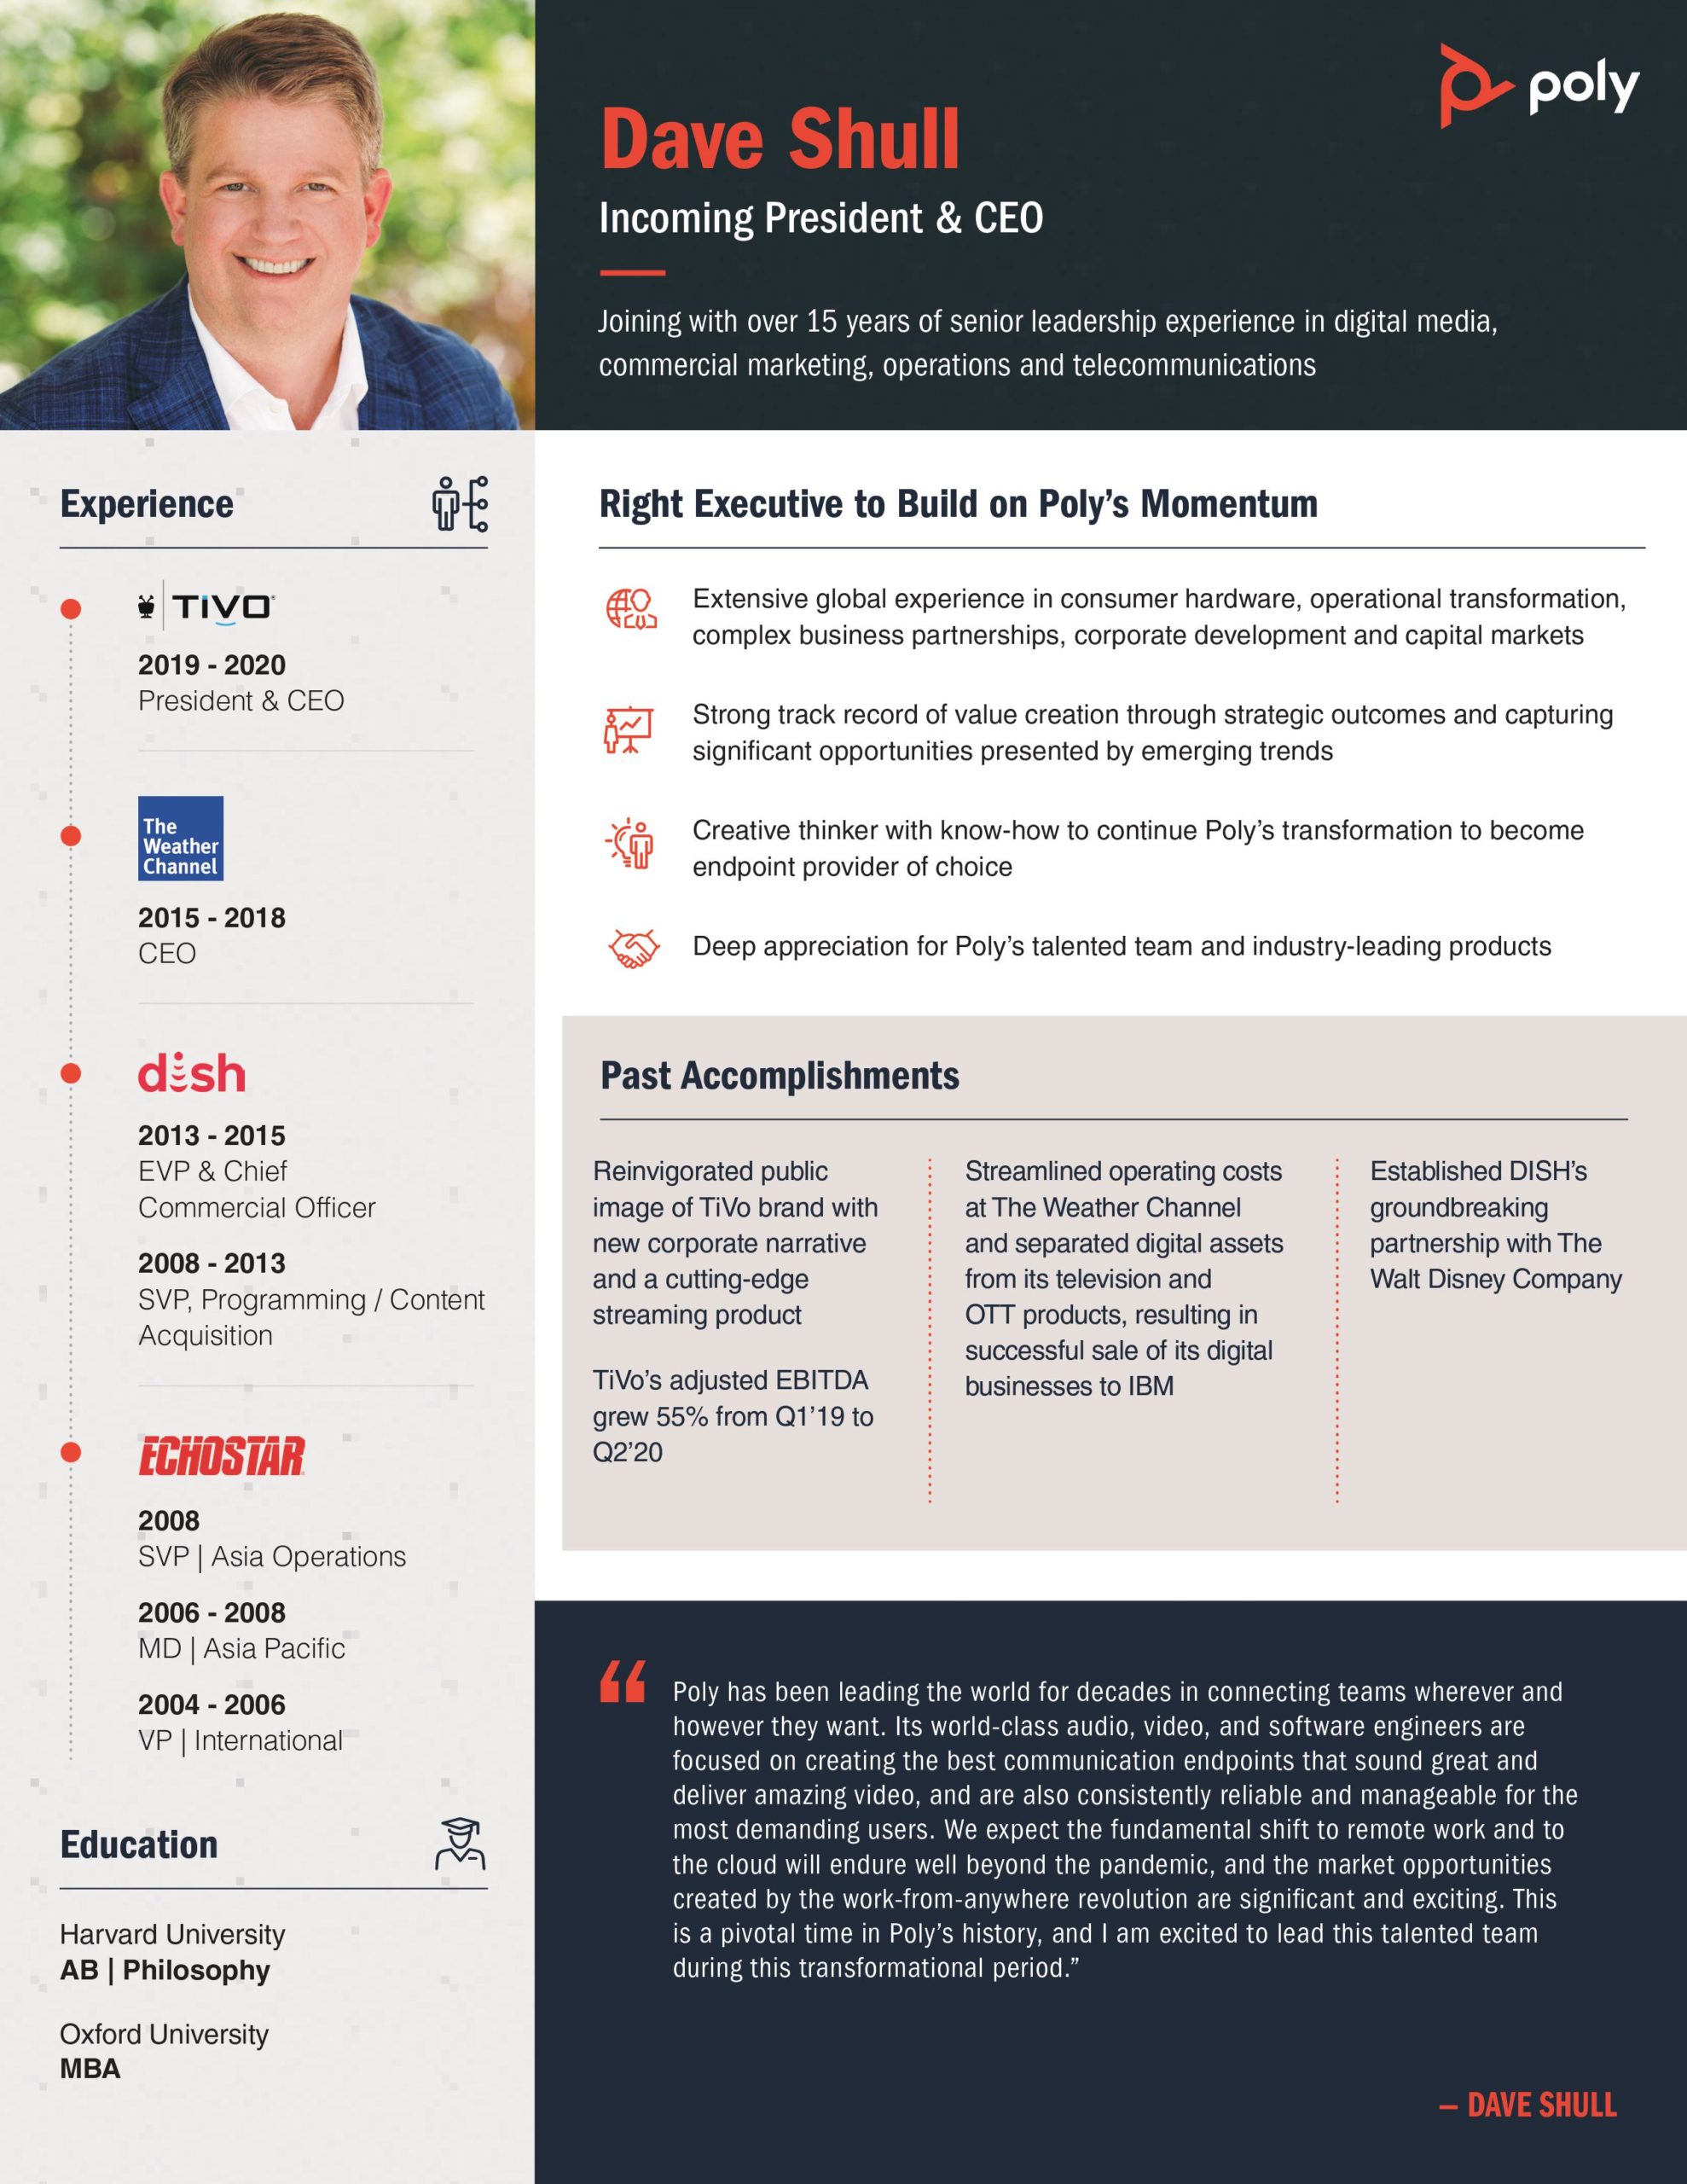 dave shull poly ceo infographic